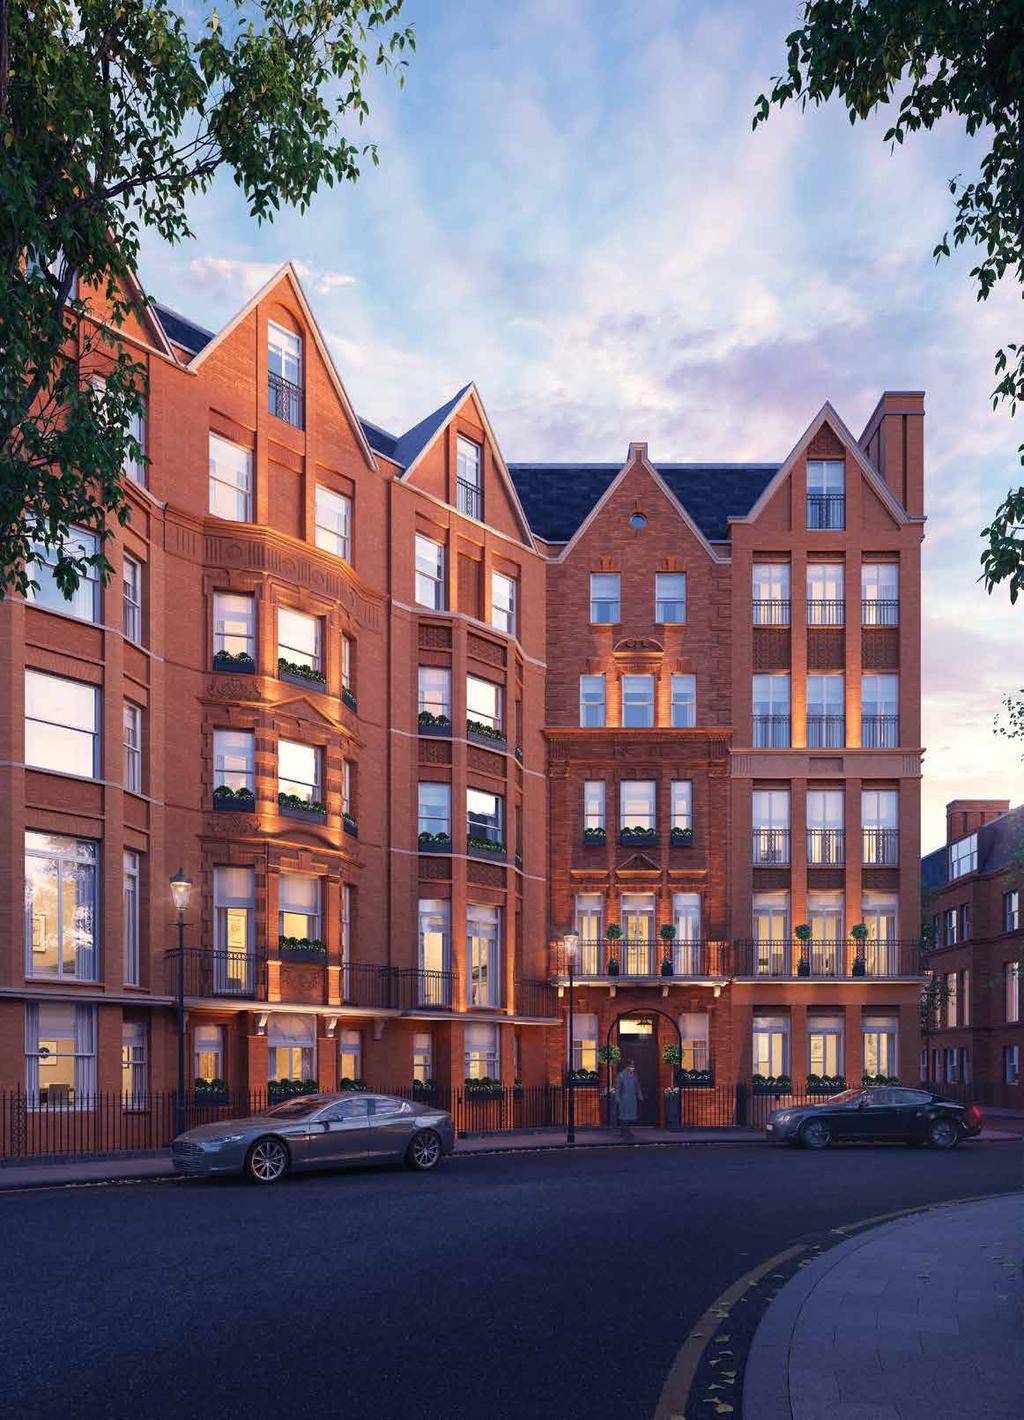 HANS PLACE Kingwood is a new residential development of ten apartments in the heart of Knightsbridge, facing south over the gardens of Hans Place, widely considered to be the most